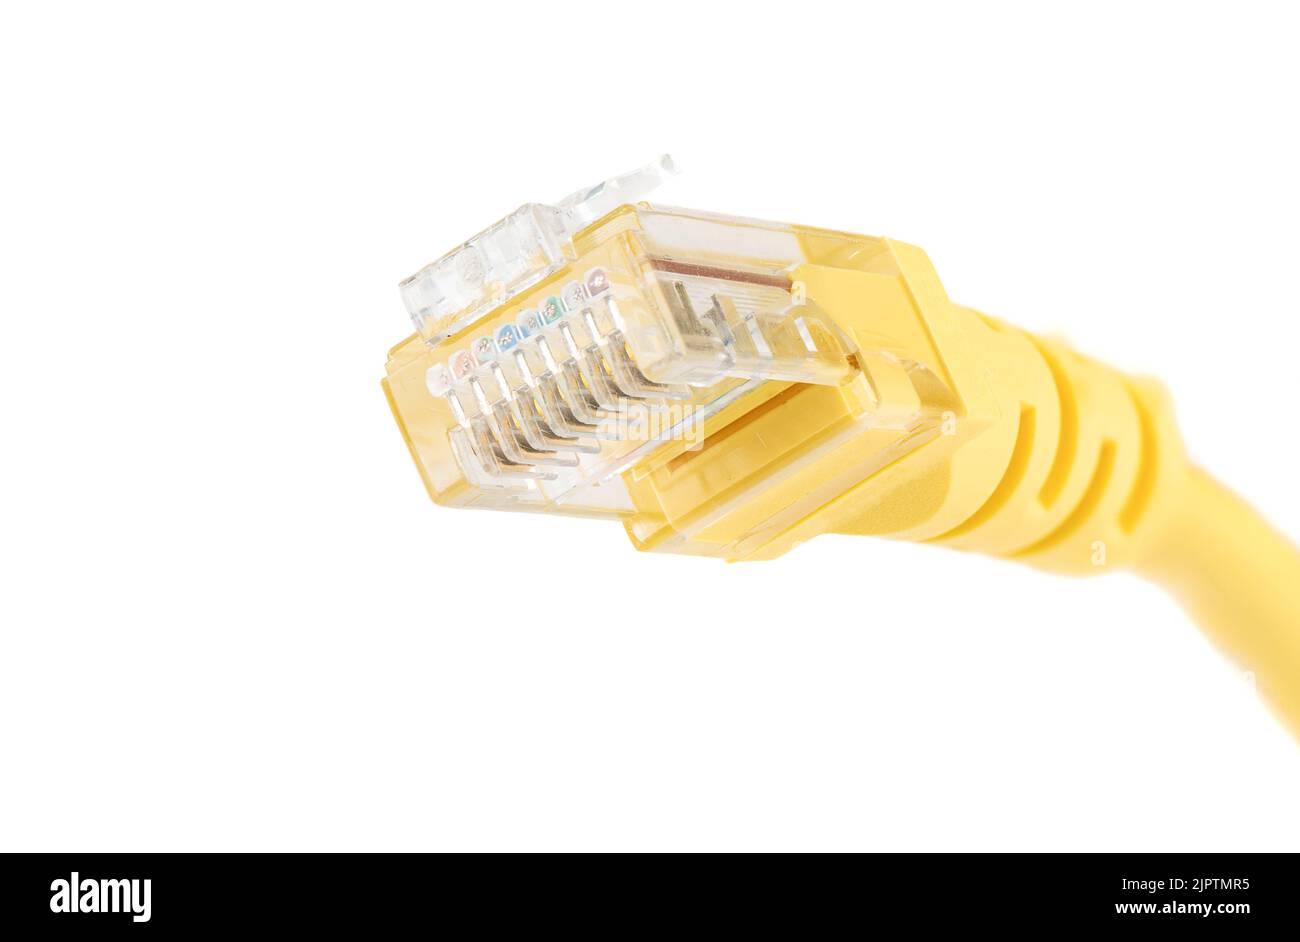 Macro shot of a yellow Ethernet cable for a LAN network connection with an RJ-45 network connection plug. White background, copy space. Stock Photo